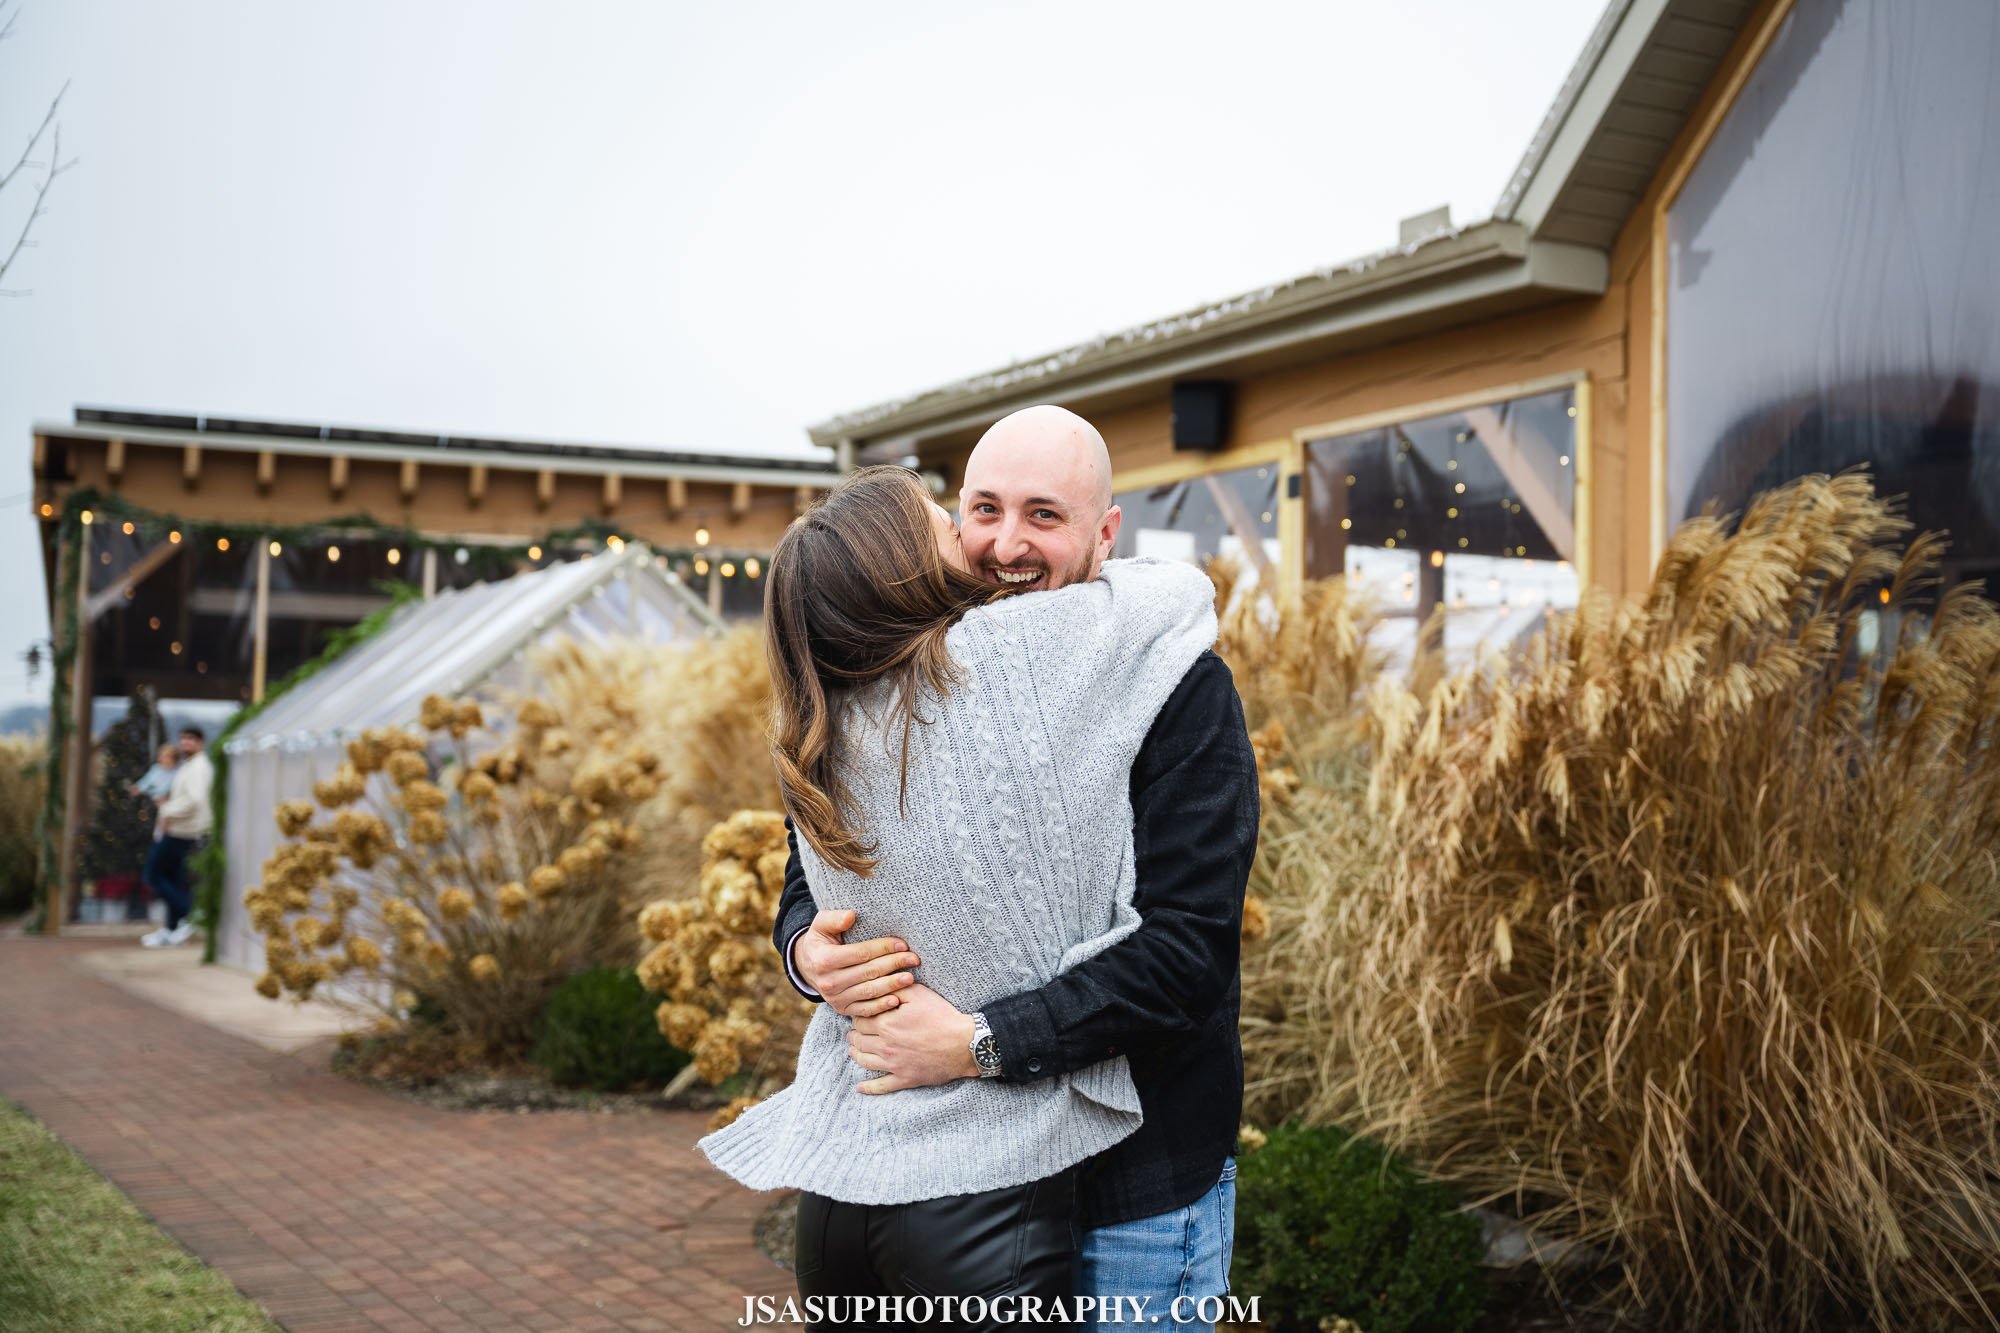 drew-alex-surprise-proposal-photos-old-westminister-winery-jsasuphotography-9.jpg